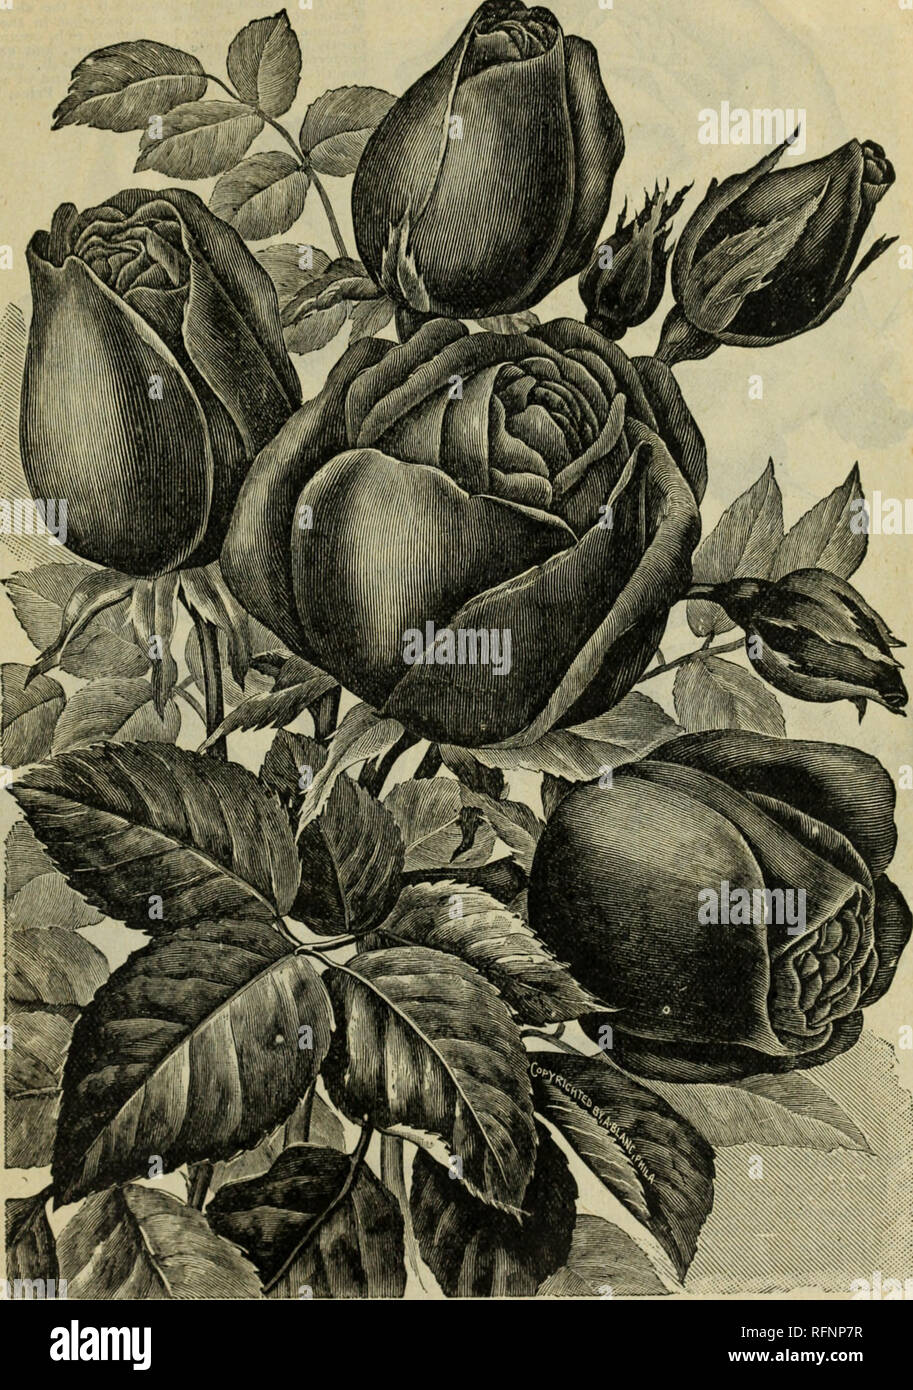 . Catalogue of plants, bulbs and seeds. Nursery stock Ohio Catalogs; Flowers Seeds Catalogs. The John A Doyle Co., Florists, Springfield, Ohio. TWO NEW EVER-BLOOMING ROSES. Price, 15 cents each. The two for 25 cents.. MRS. PIERPONT MORGAN. «r*« nlPnnniiT unDl&quot; AM A sport of Mademoiselle Cusin, and in every respect superior to it. The flowers areJar- MRS. PIERPONT MORbAN. «r and very double, many of them measuring four inches across. The foliage ,s.alsomore luxuriant and larger. It is a most prolific bloomer, the flowers being of an intensely bright cer.se or rose-p.nk. By authority on Ros Stock Photo